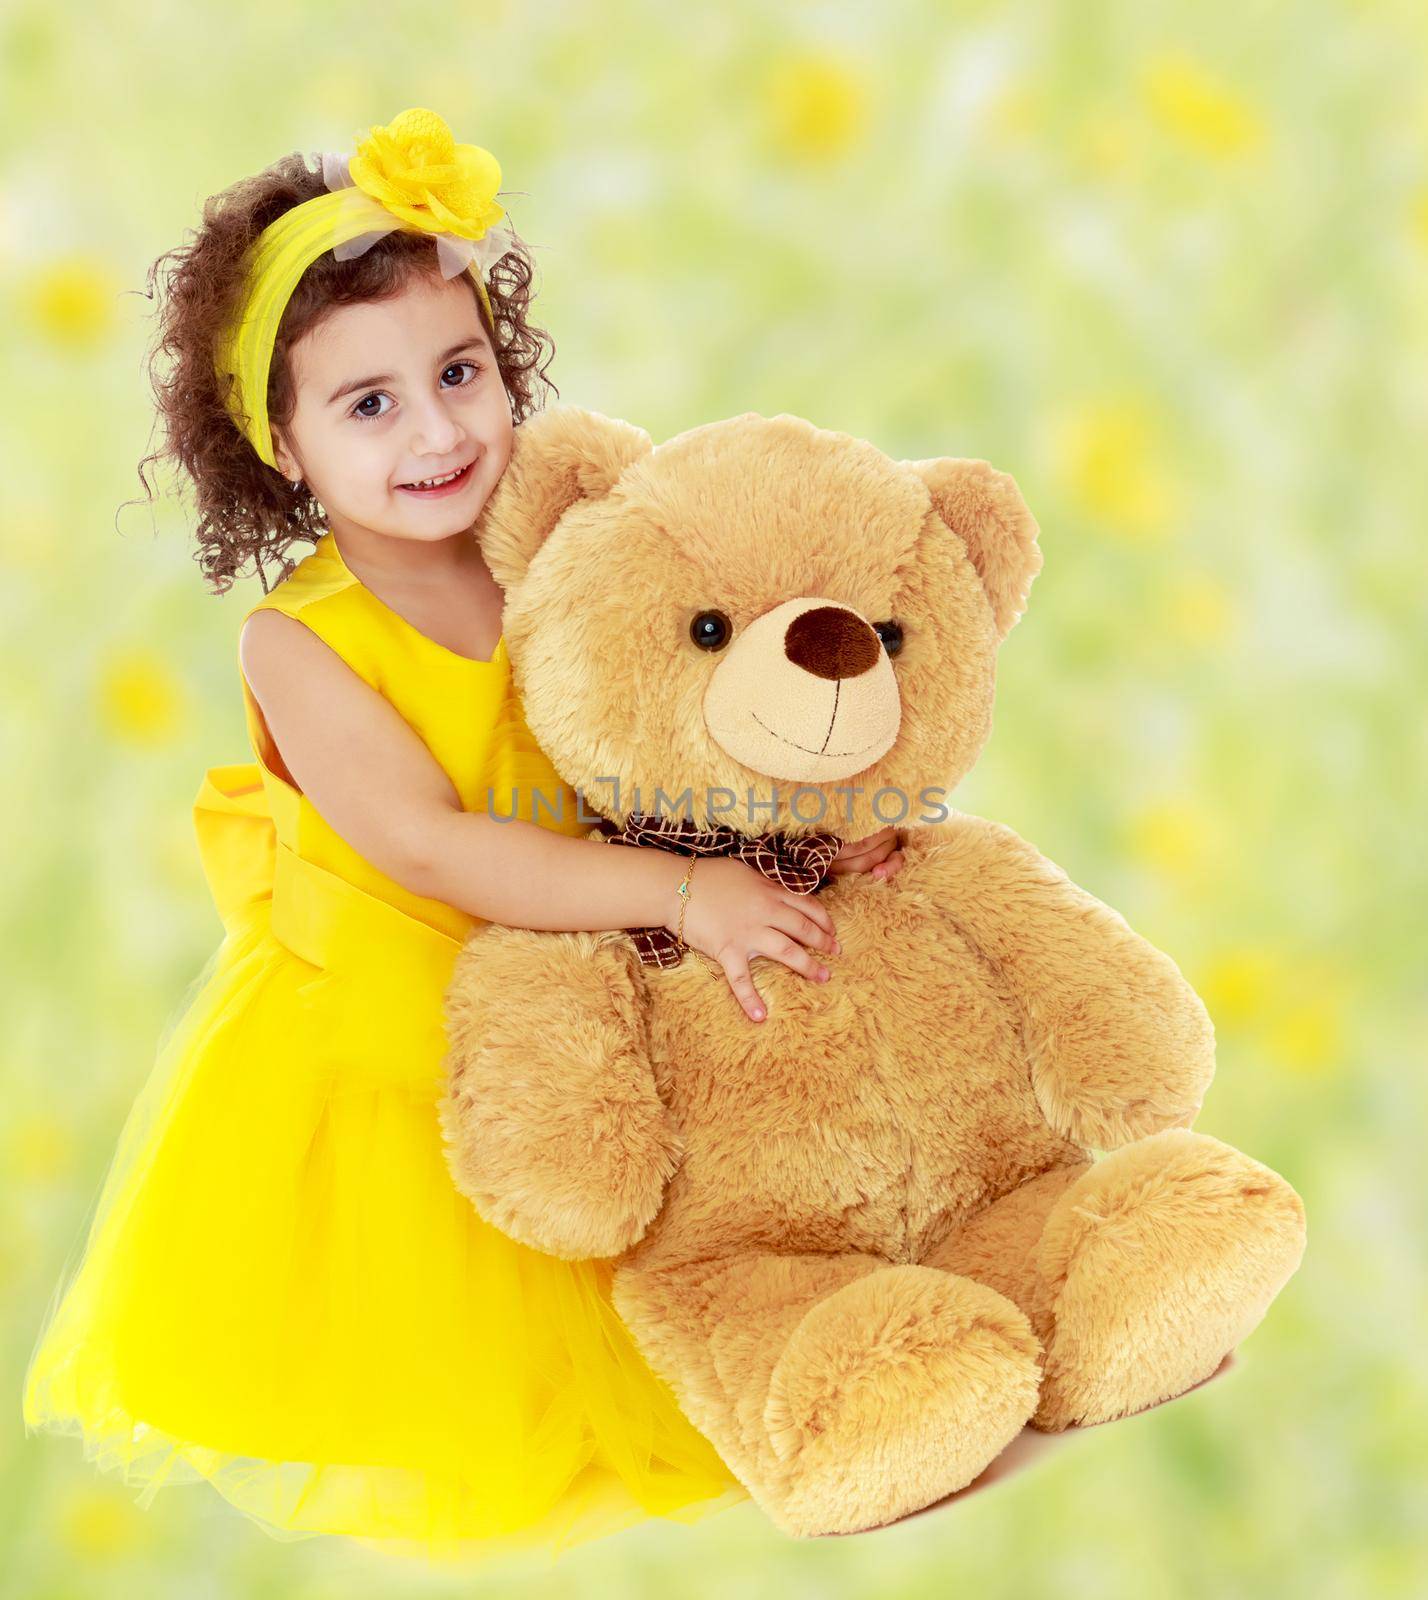 Joyful little girl in a yellow dress and bow on her head sitting on the floor. Girl hugging a big Teddy bear.Bright,floral yellow-green blurred background.